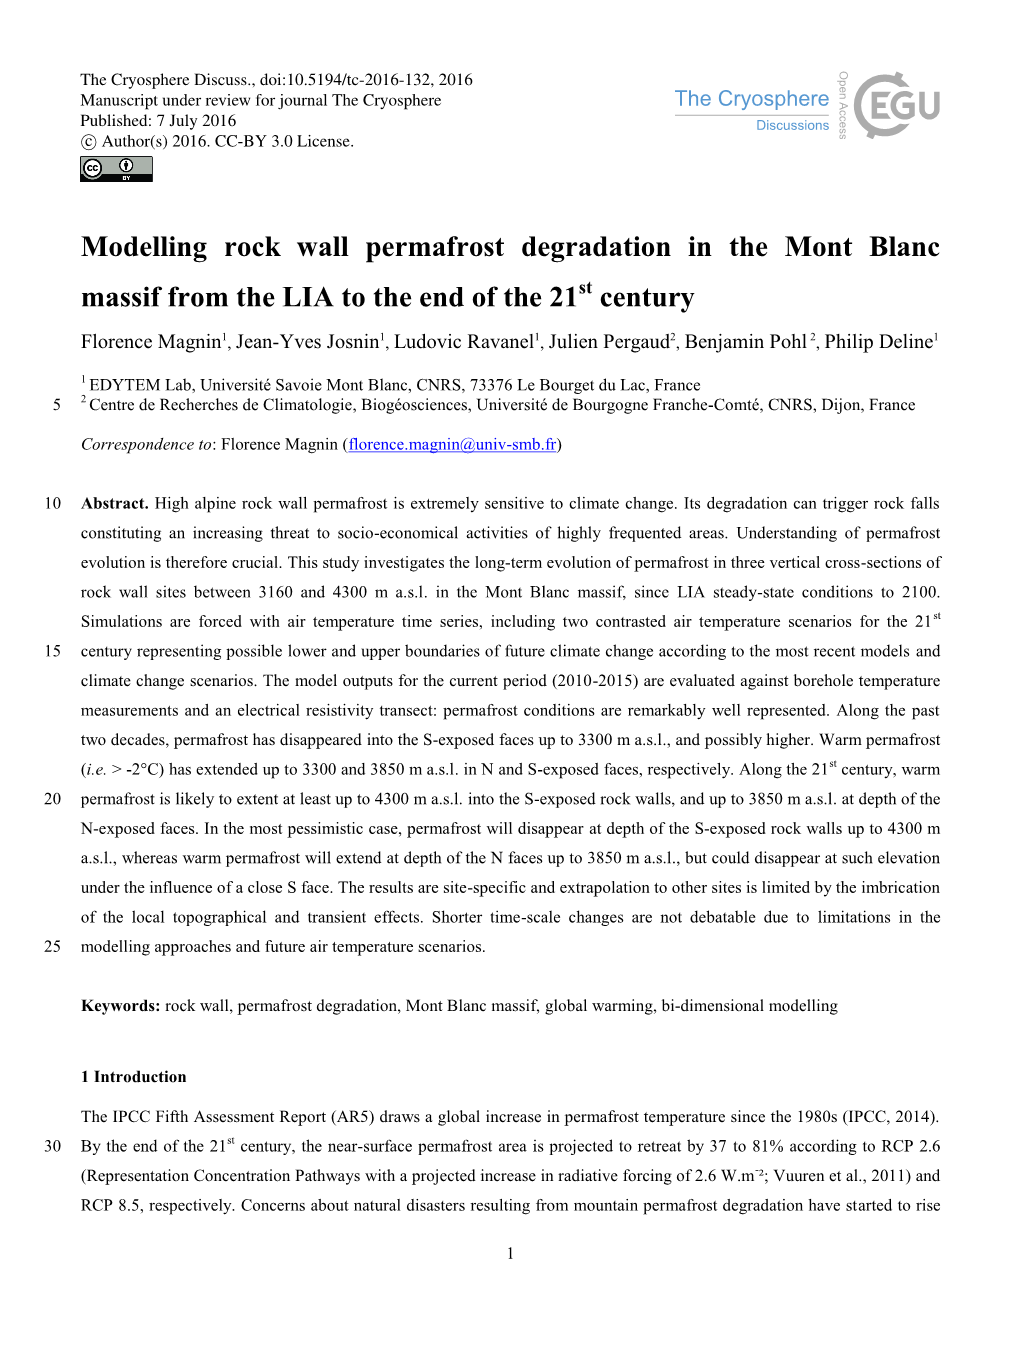 Modelling Rock Wall Permafrost Degradation in the Mont Blanc Massif from the LIA to the End of the 21St Century